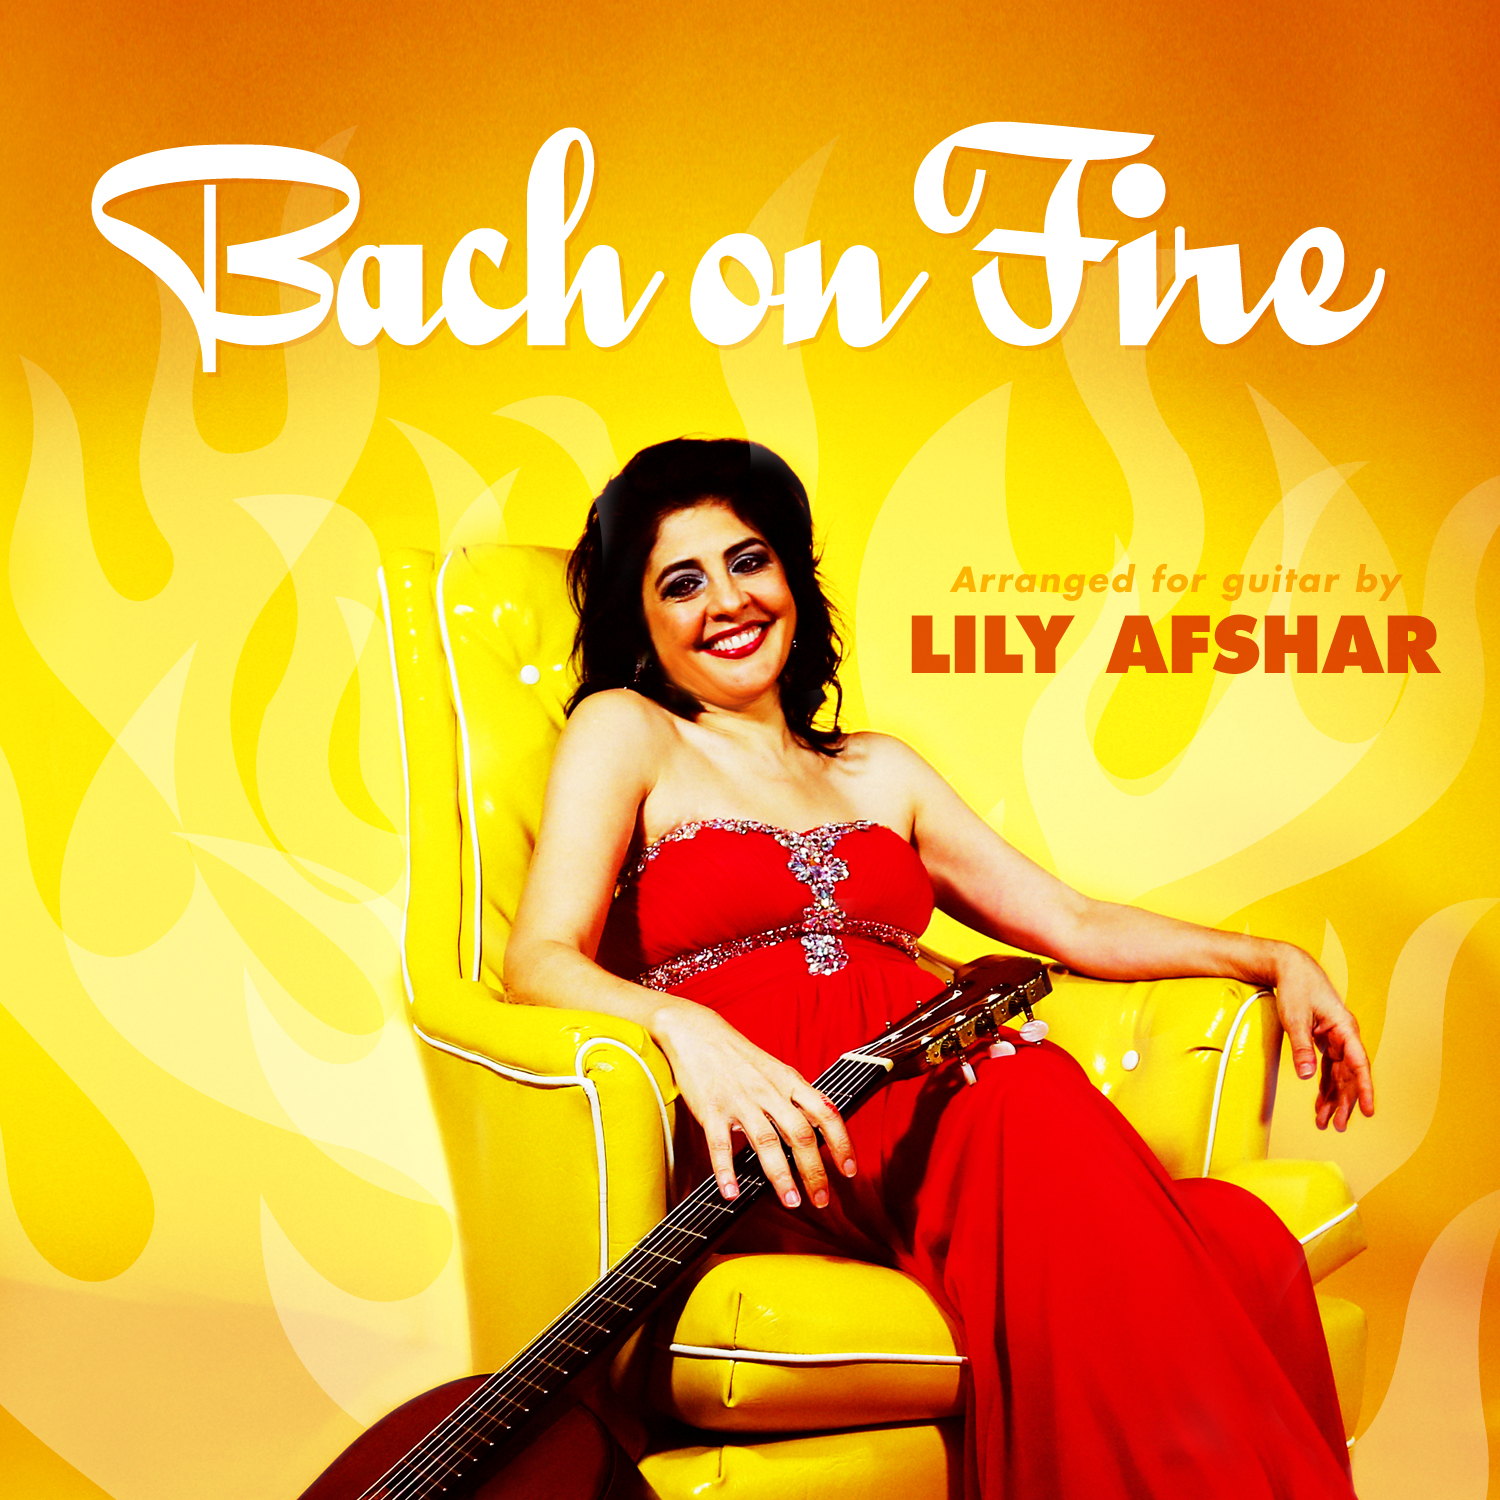 lily-afshar-bach-on-fire